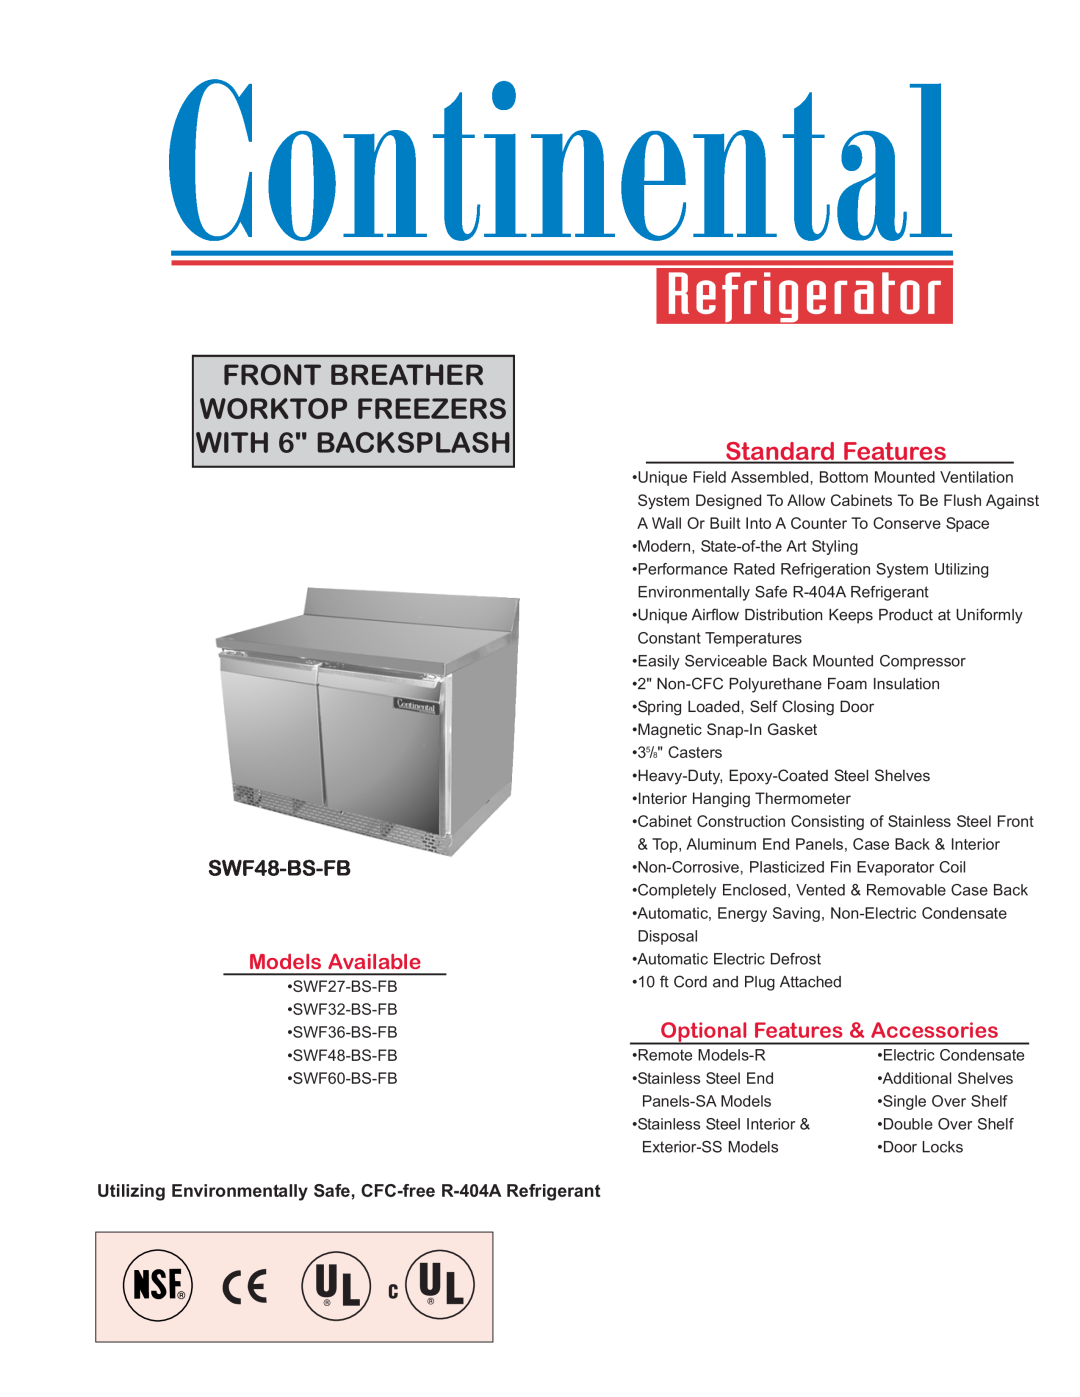 Continental Refrigerator SWF60-BS-FB manual FRONT BREATHER WORKTOP FREEZERS WITH 6 BACKSPLASH, Standard Features 